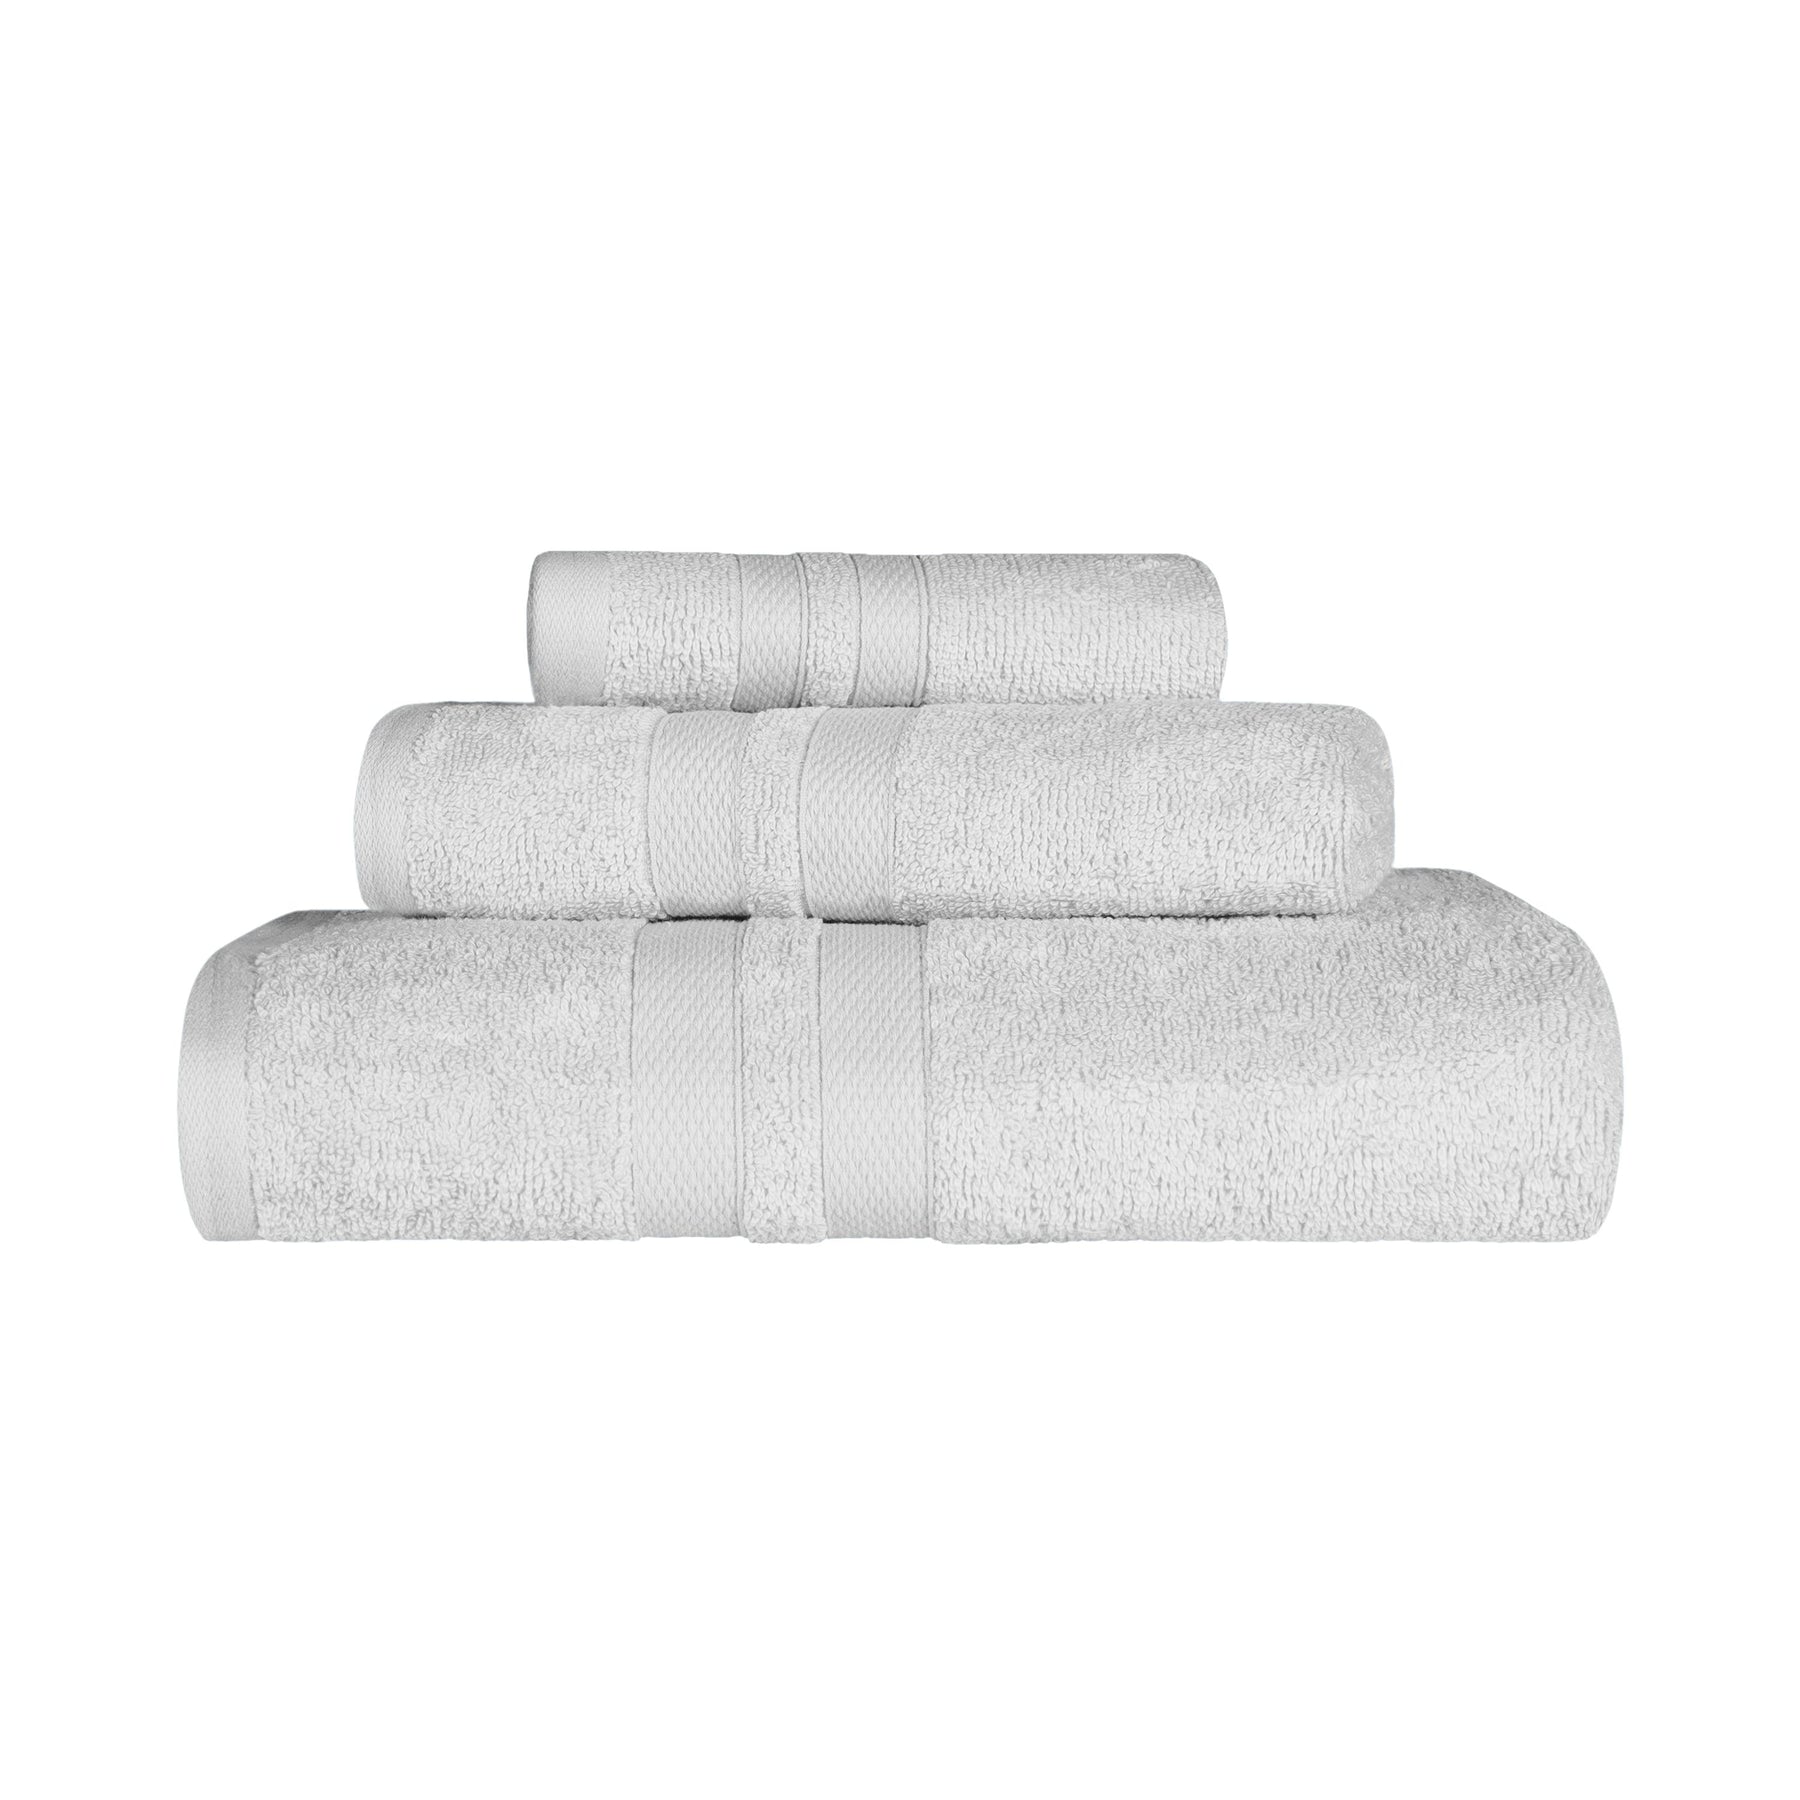 Superior Highly Absorbent Cotton 4-pc. Hand Towel Set Silver